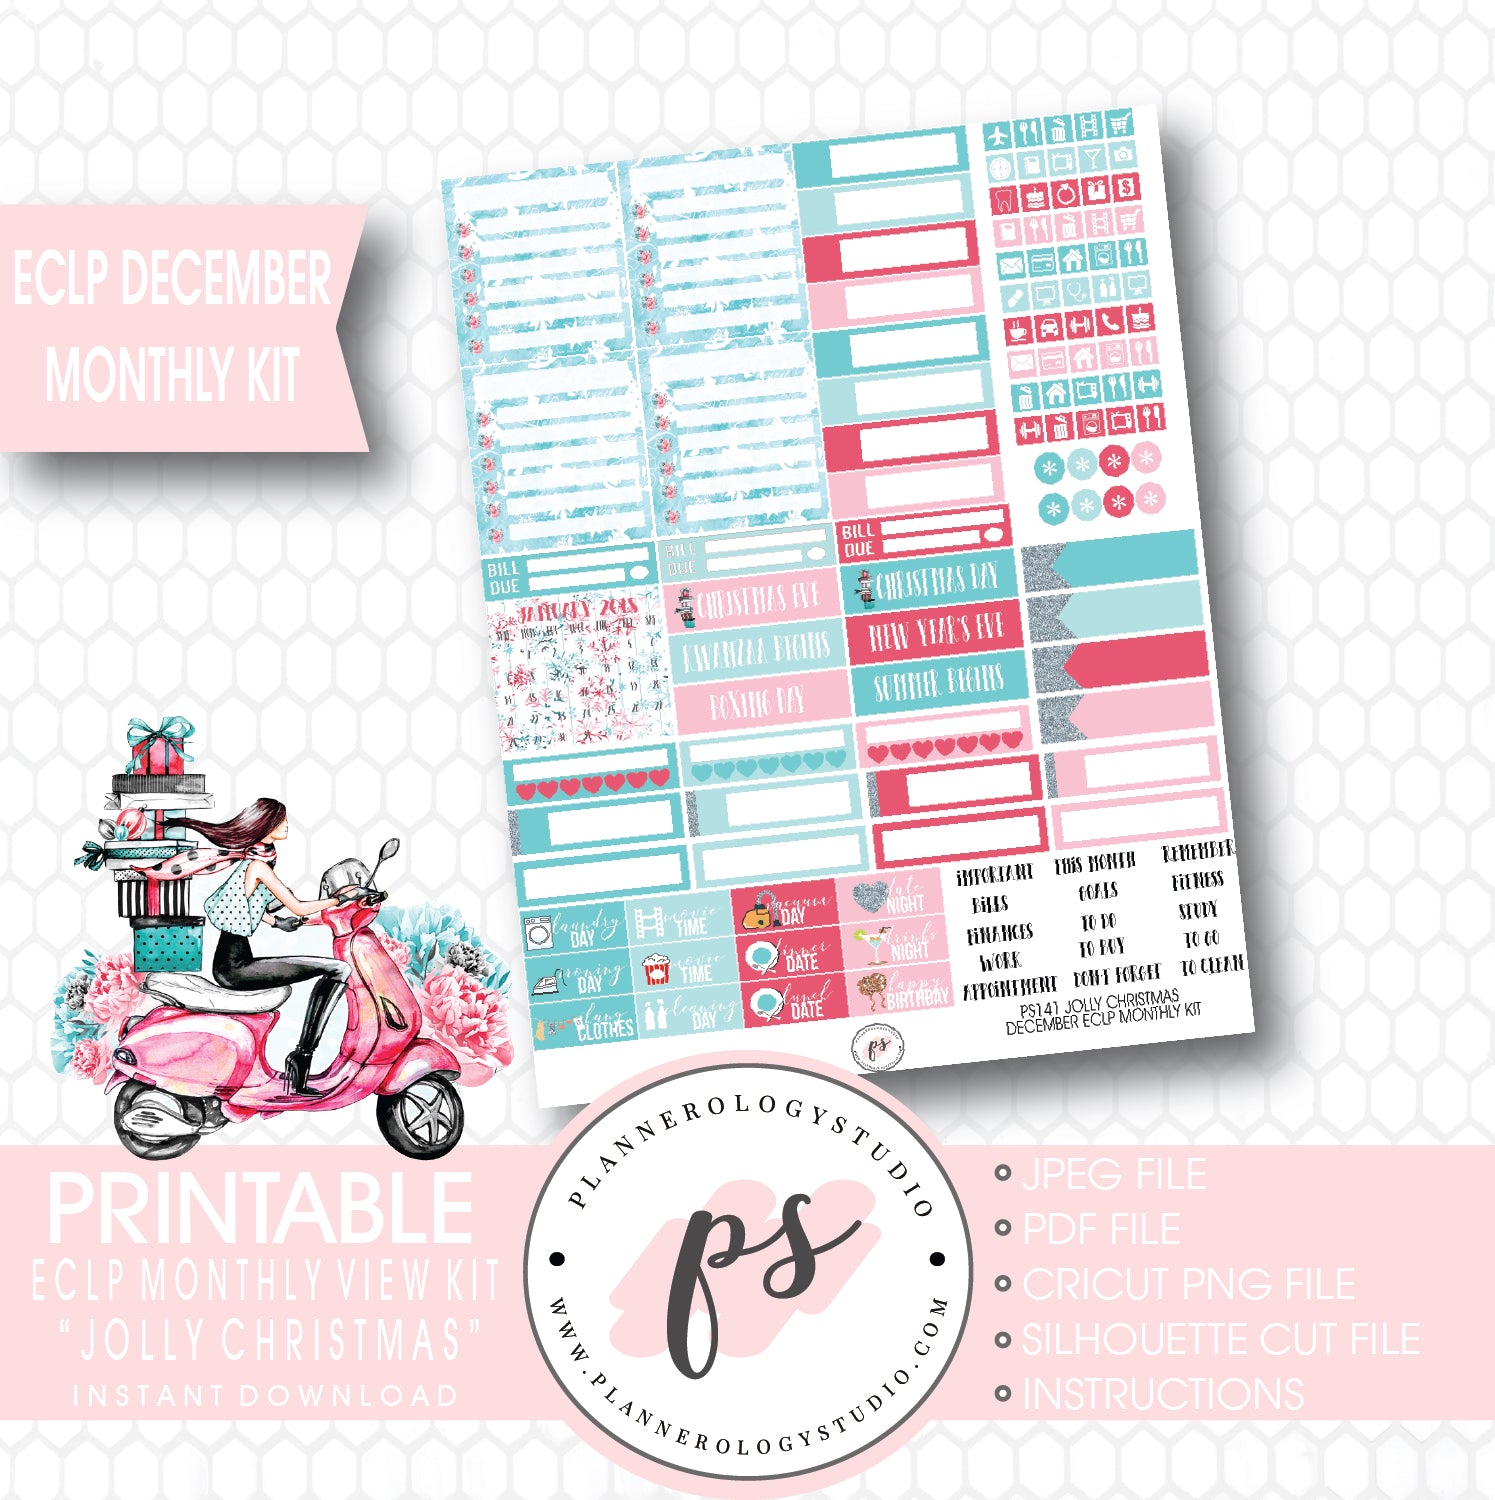 Jolly Christmas December 2017 Monthly View Kit Printable Planner Stickers (for use with Erin Condren) - Plannerologystudio